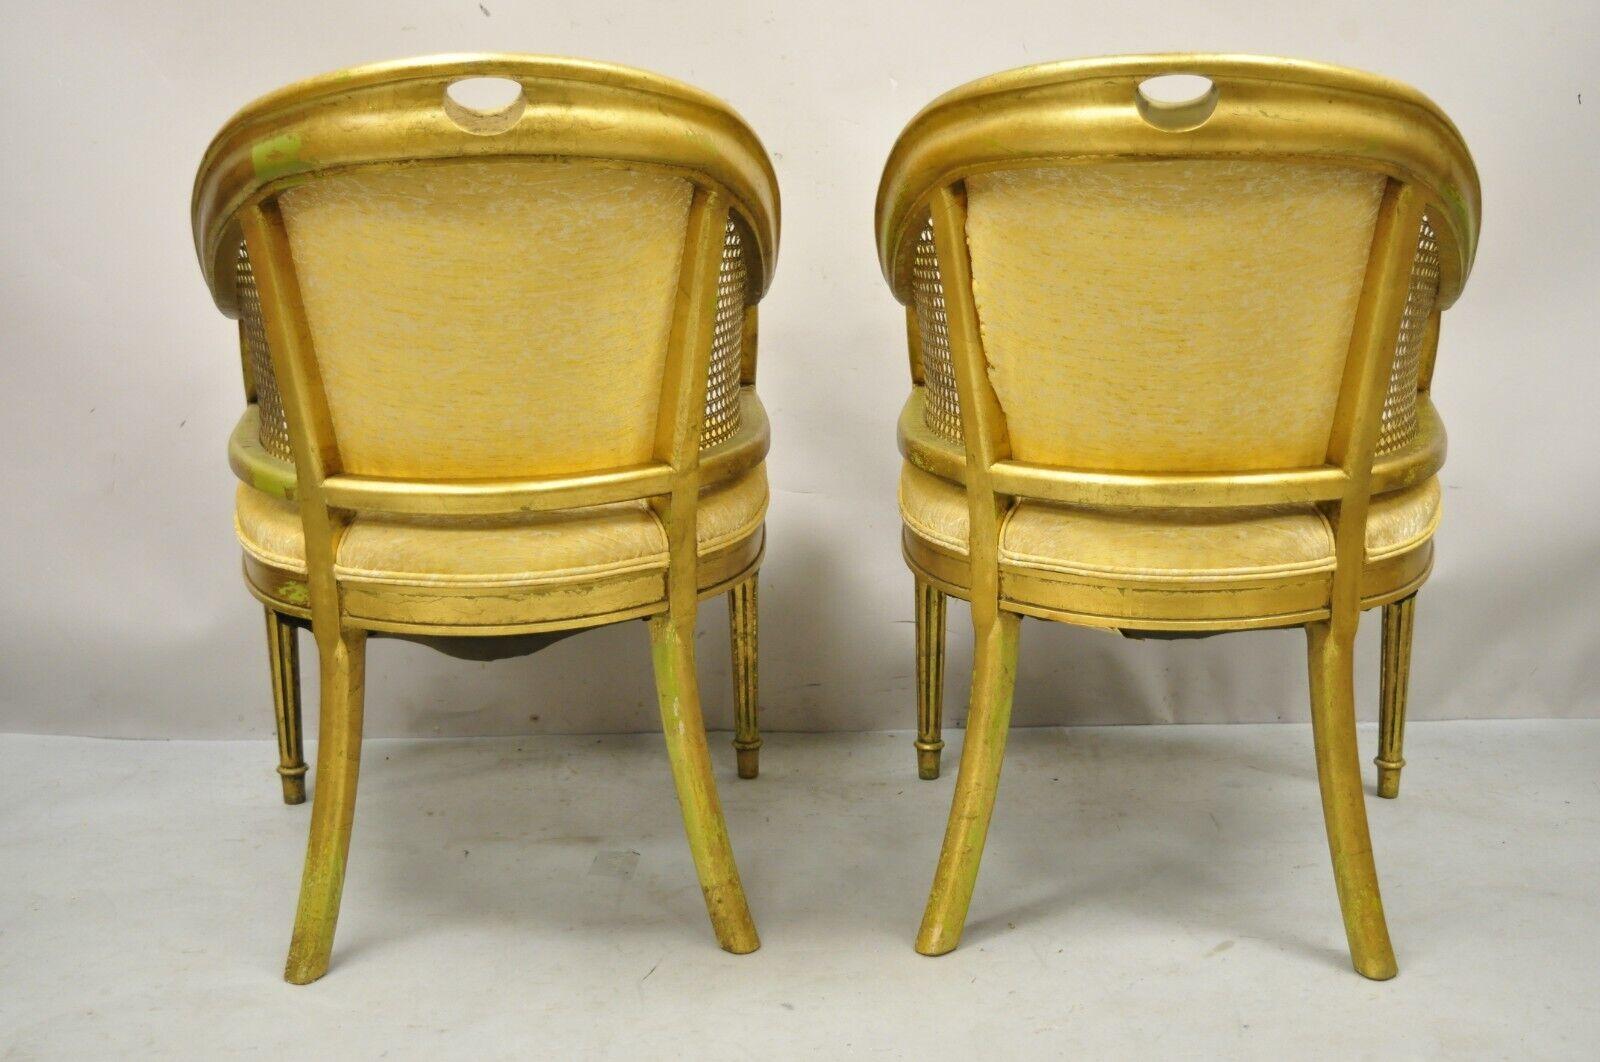 French Hollywood Regency Gold Gilt Barrel Back Cane Lounge Chairs, a Pair For Sale 6